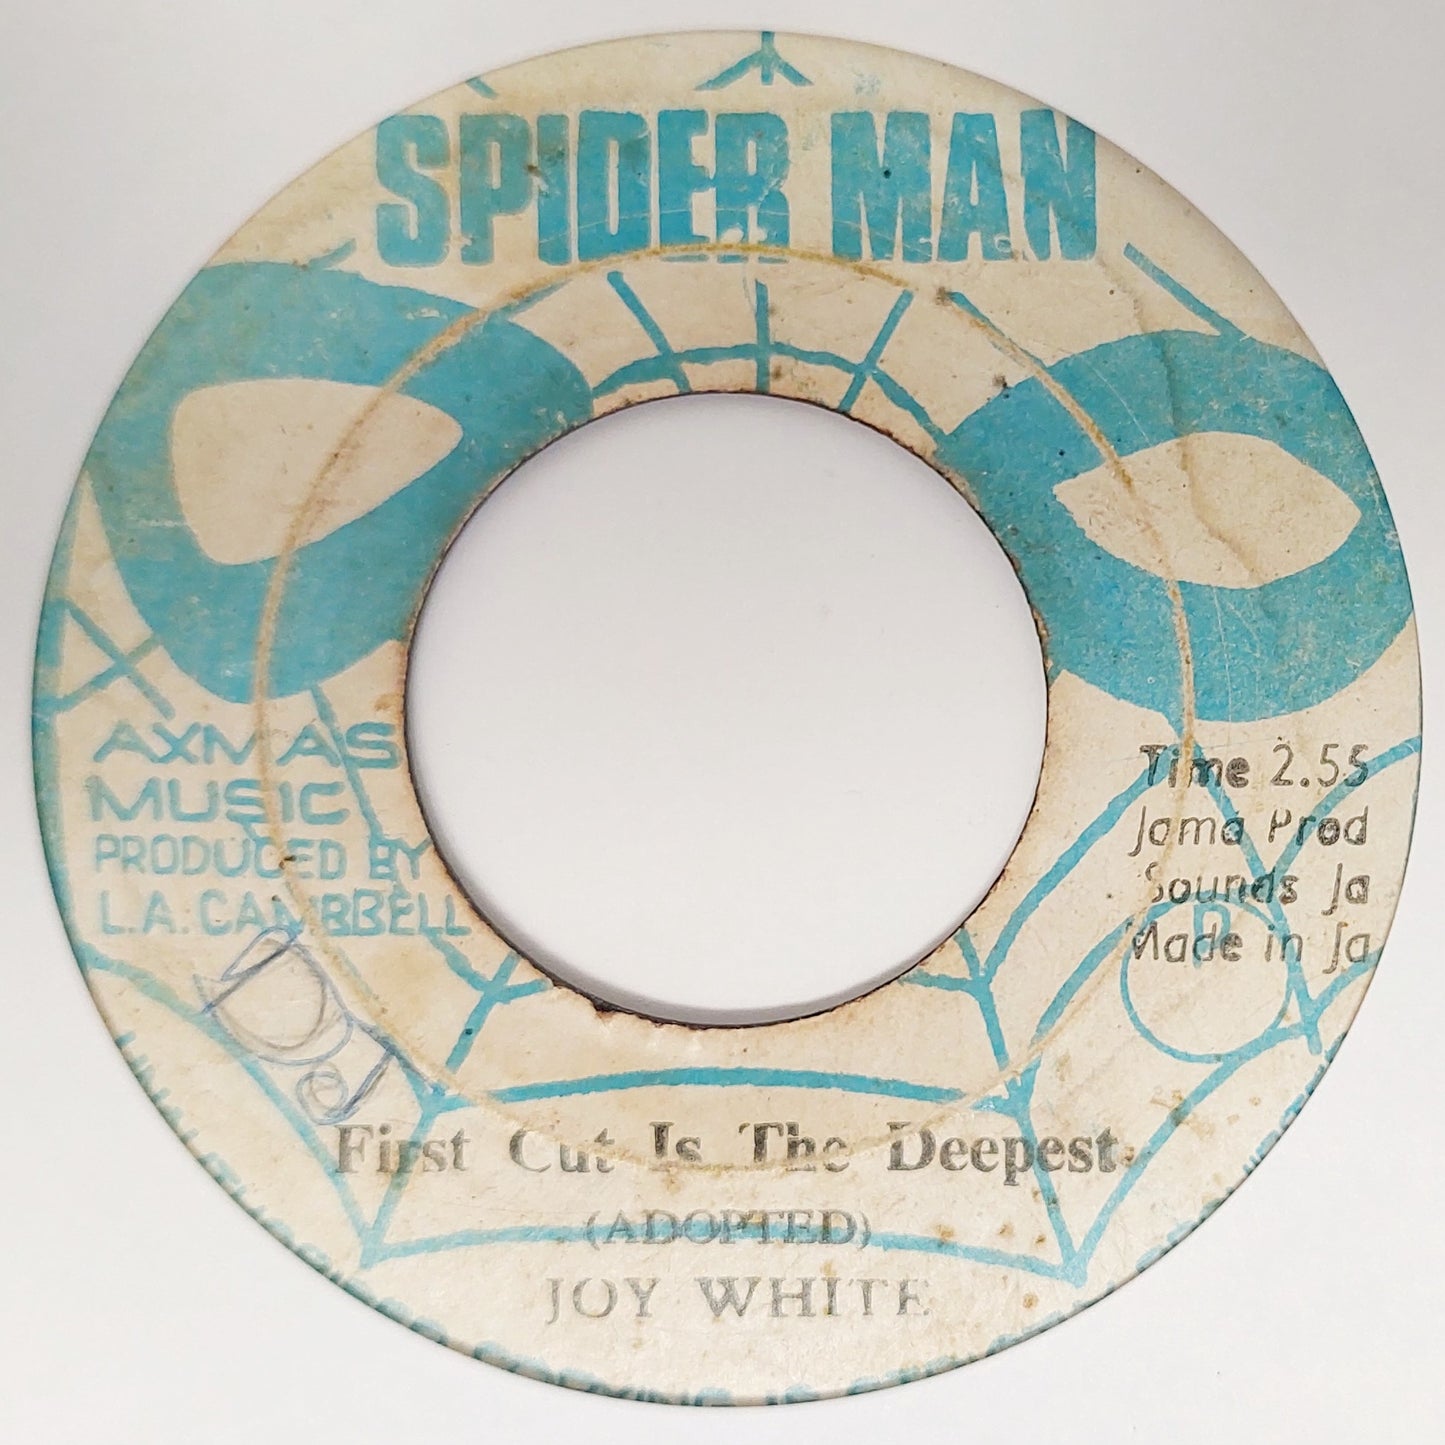 Joe White - First Cut Is The Deepest